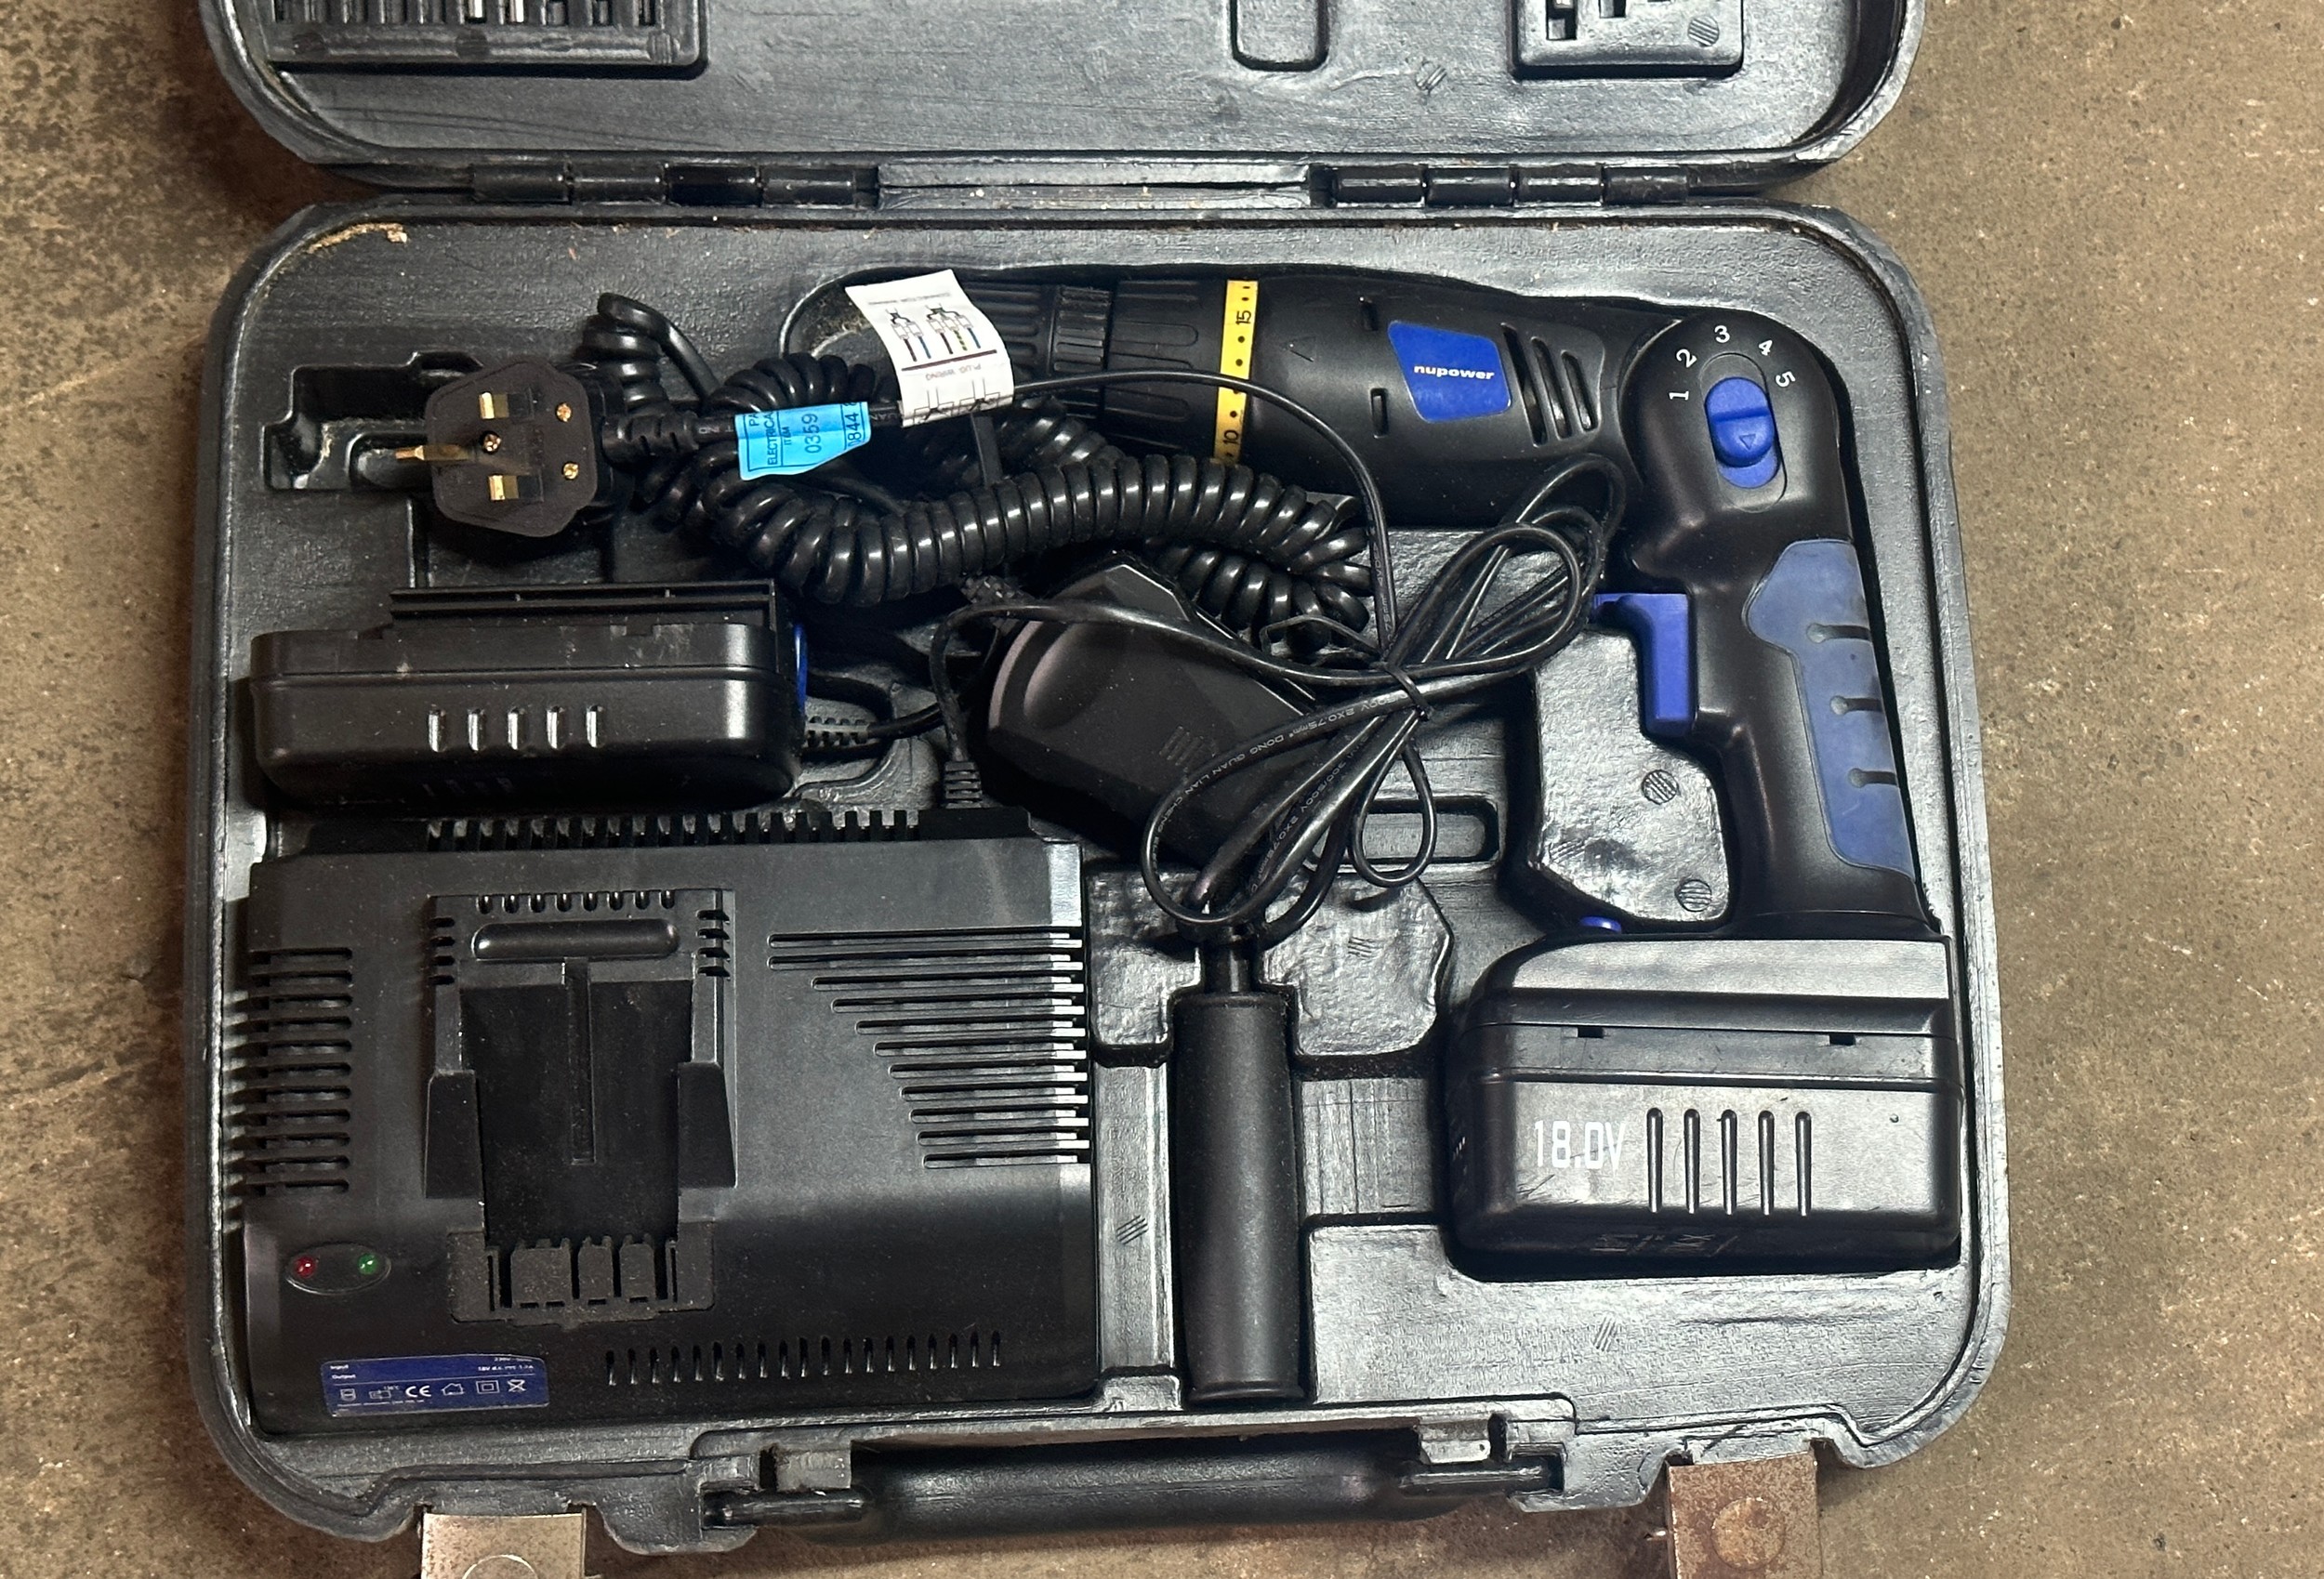 18 v Nu power drill - in working order - Image 3 of 3